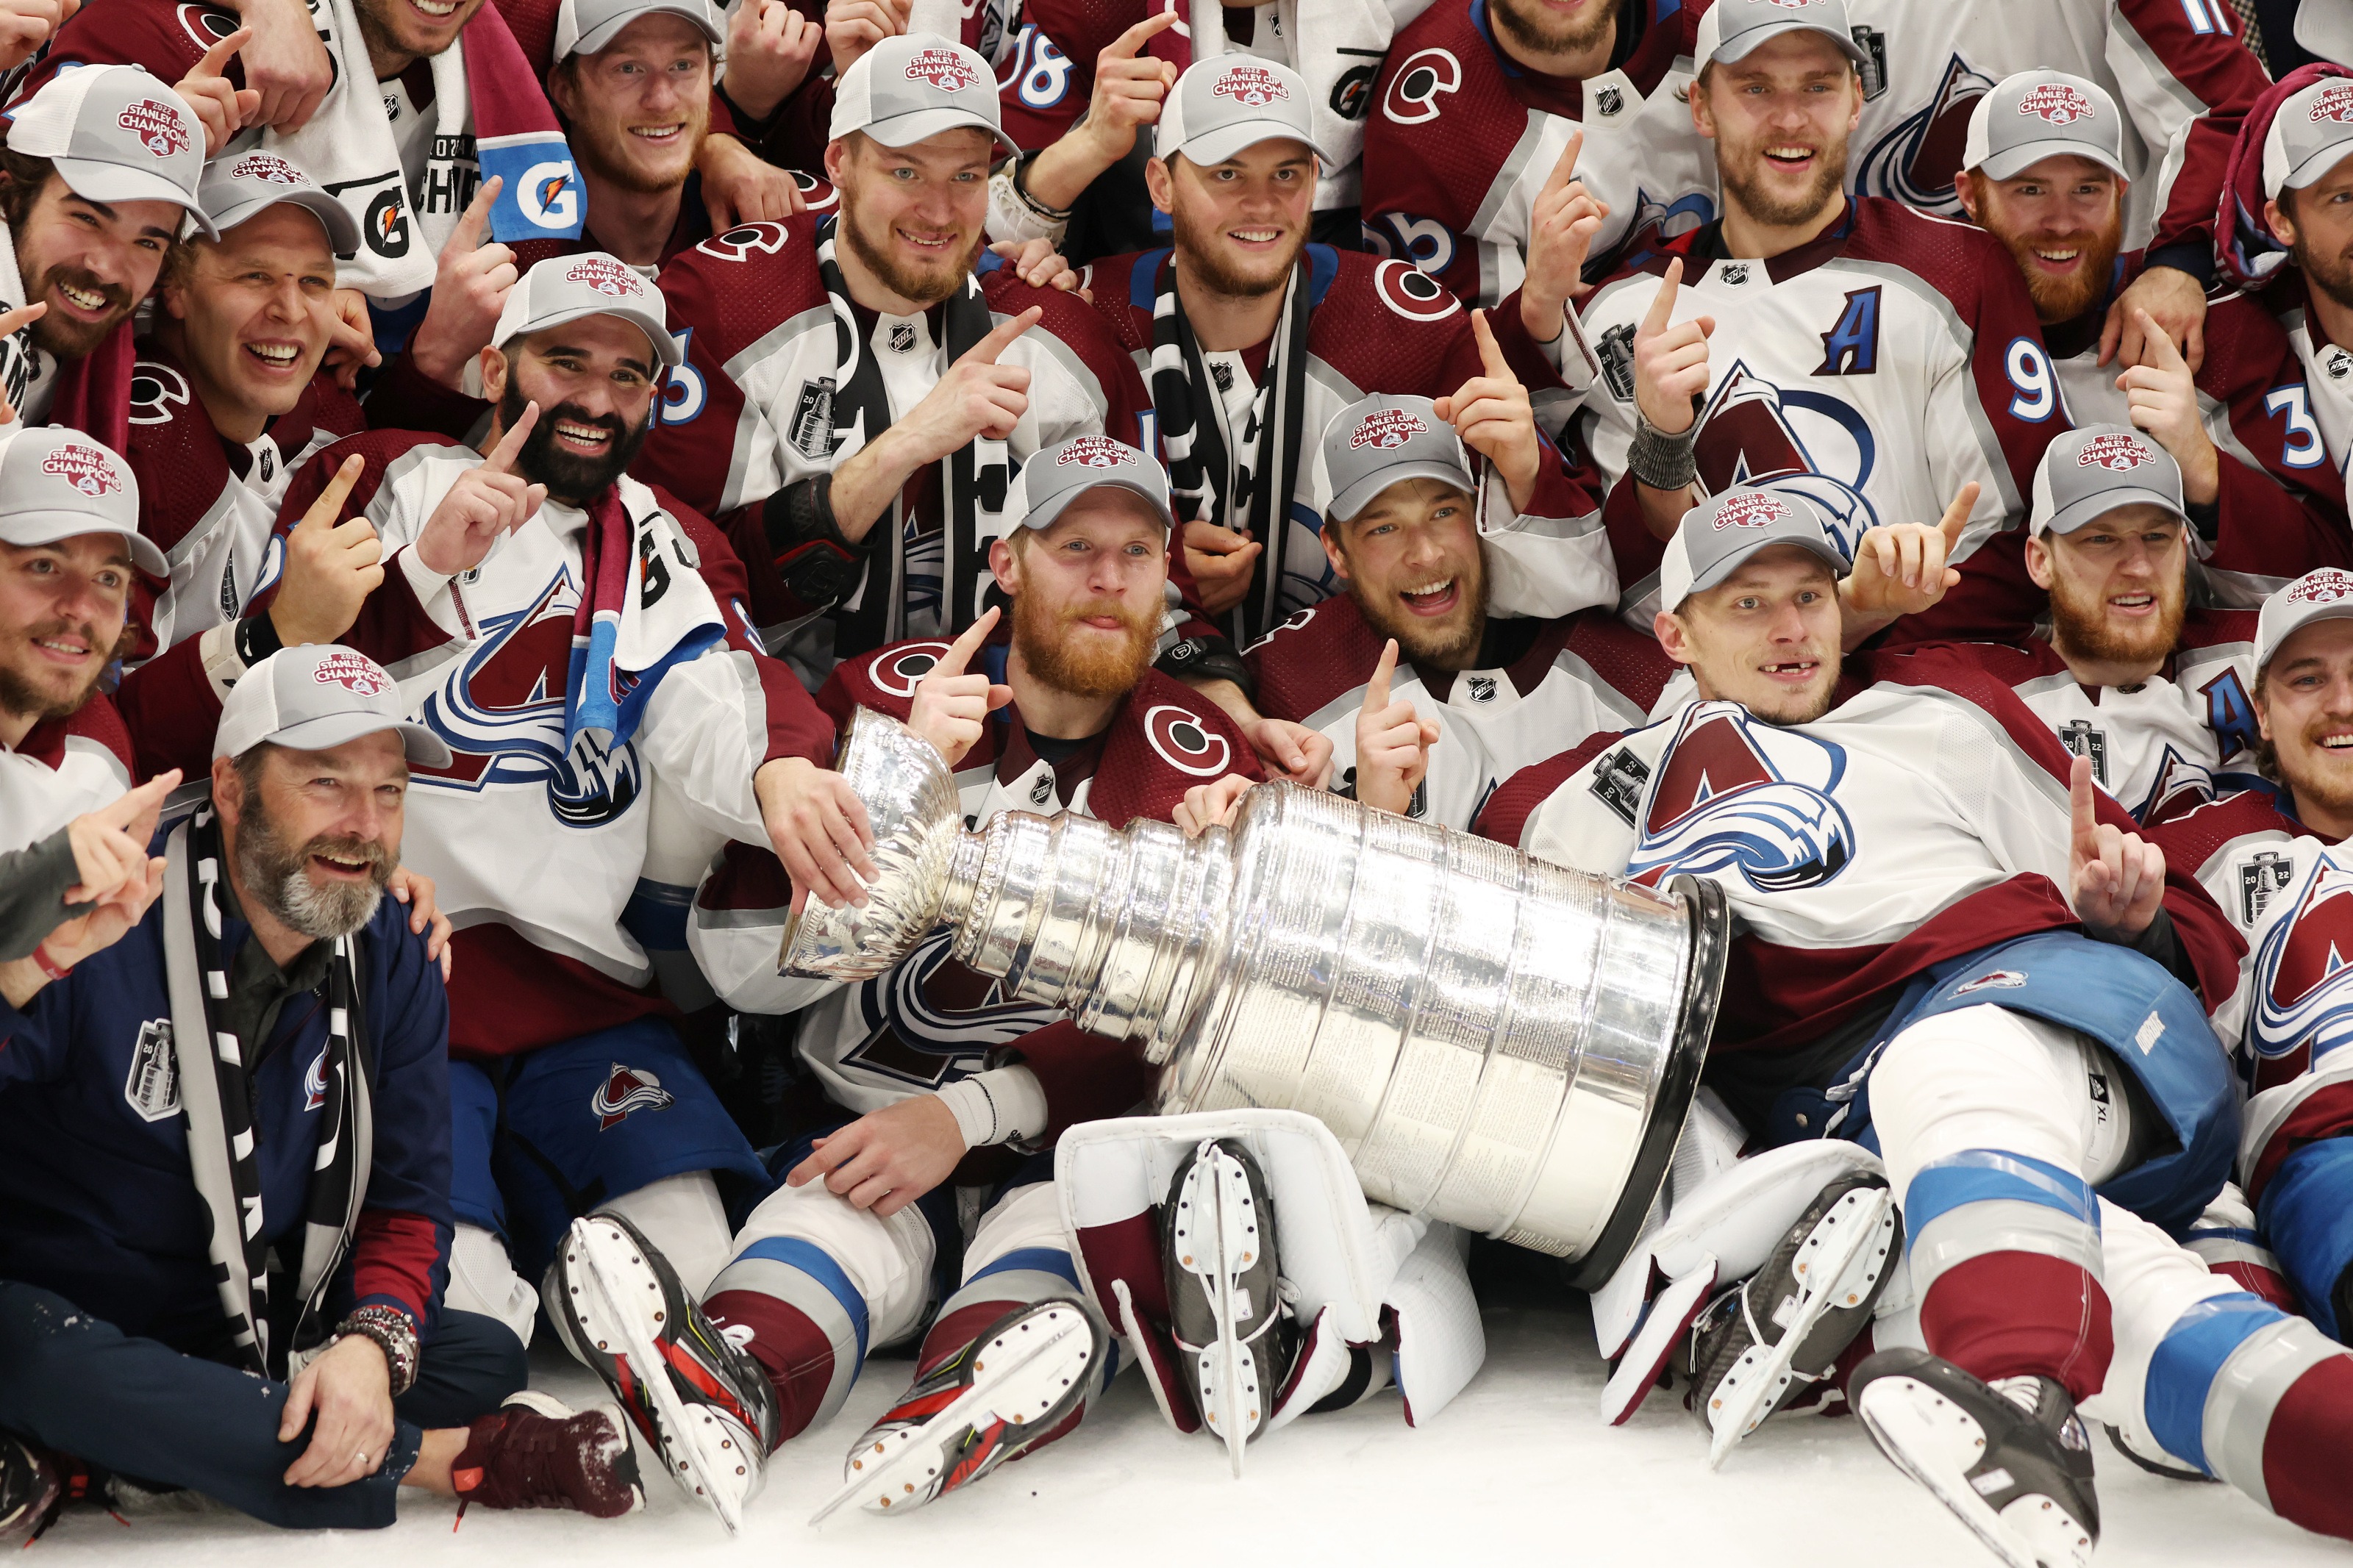 Photos: Colorado Avalanche celebrate Stanley Cup Championship in